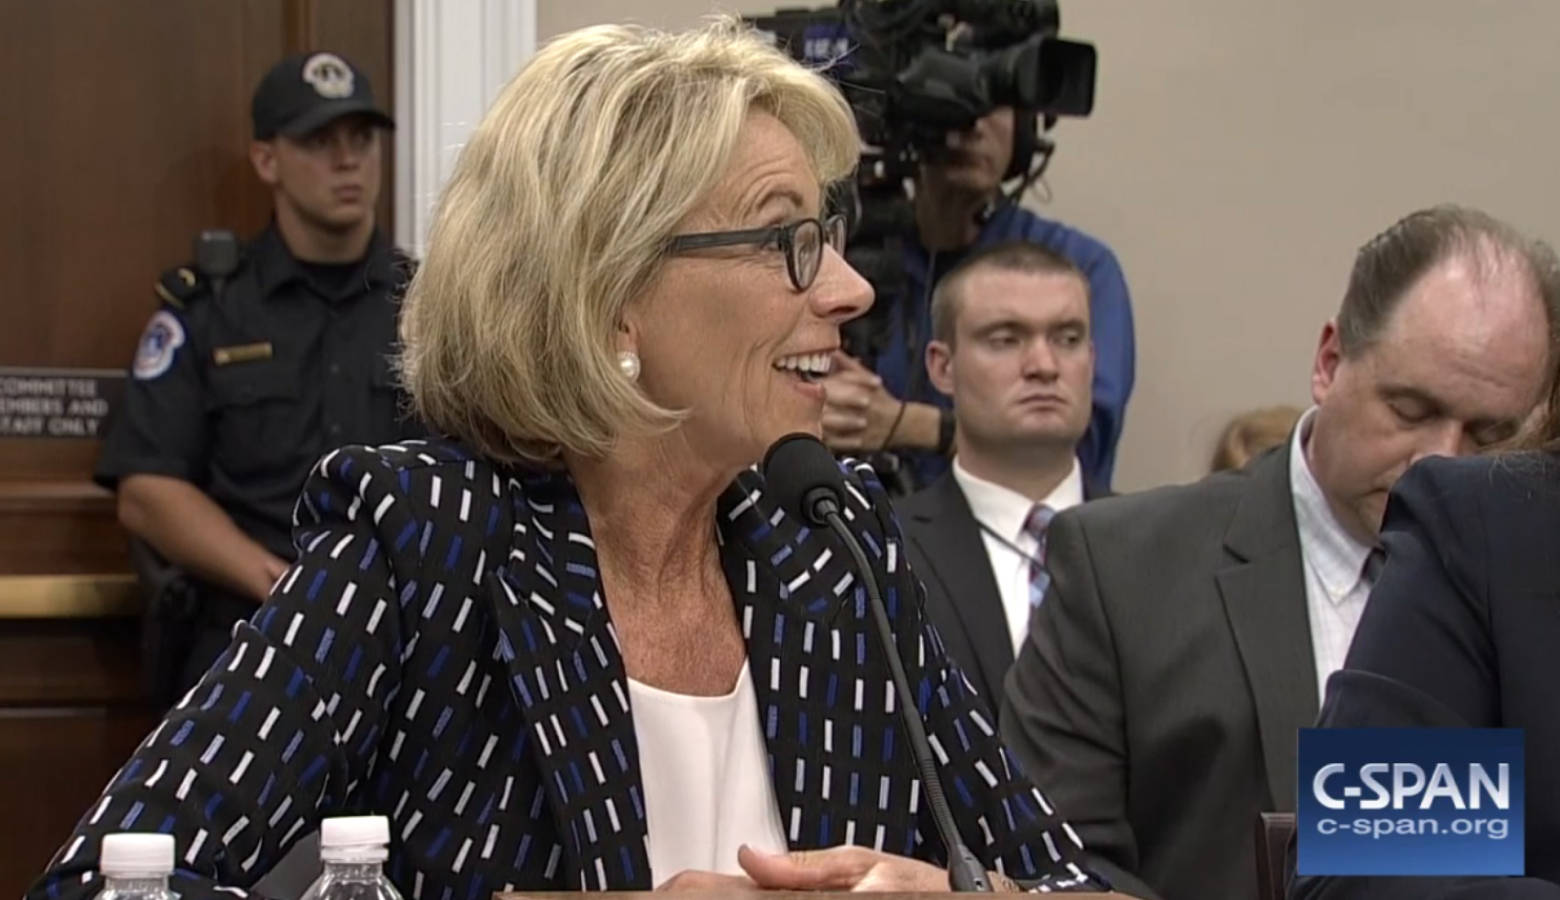 U.S. Secretary of Education Betsy Devos faces questions about a Bloomington, Indiana, school whose admissions brochure gives them the right to deny admission or end enrollment for students whose home lives include behaviors prohibited in the Bible, including homosexual or bisexual activity. (C-SPAN screenshot)